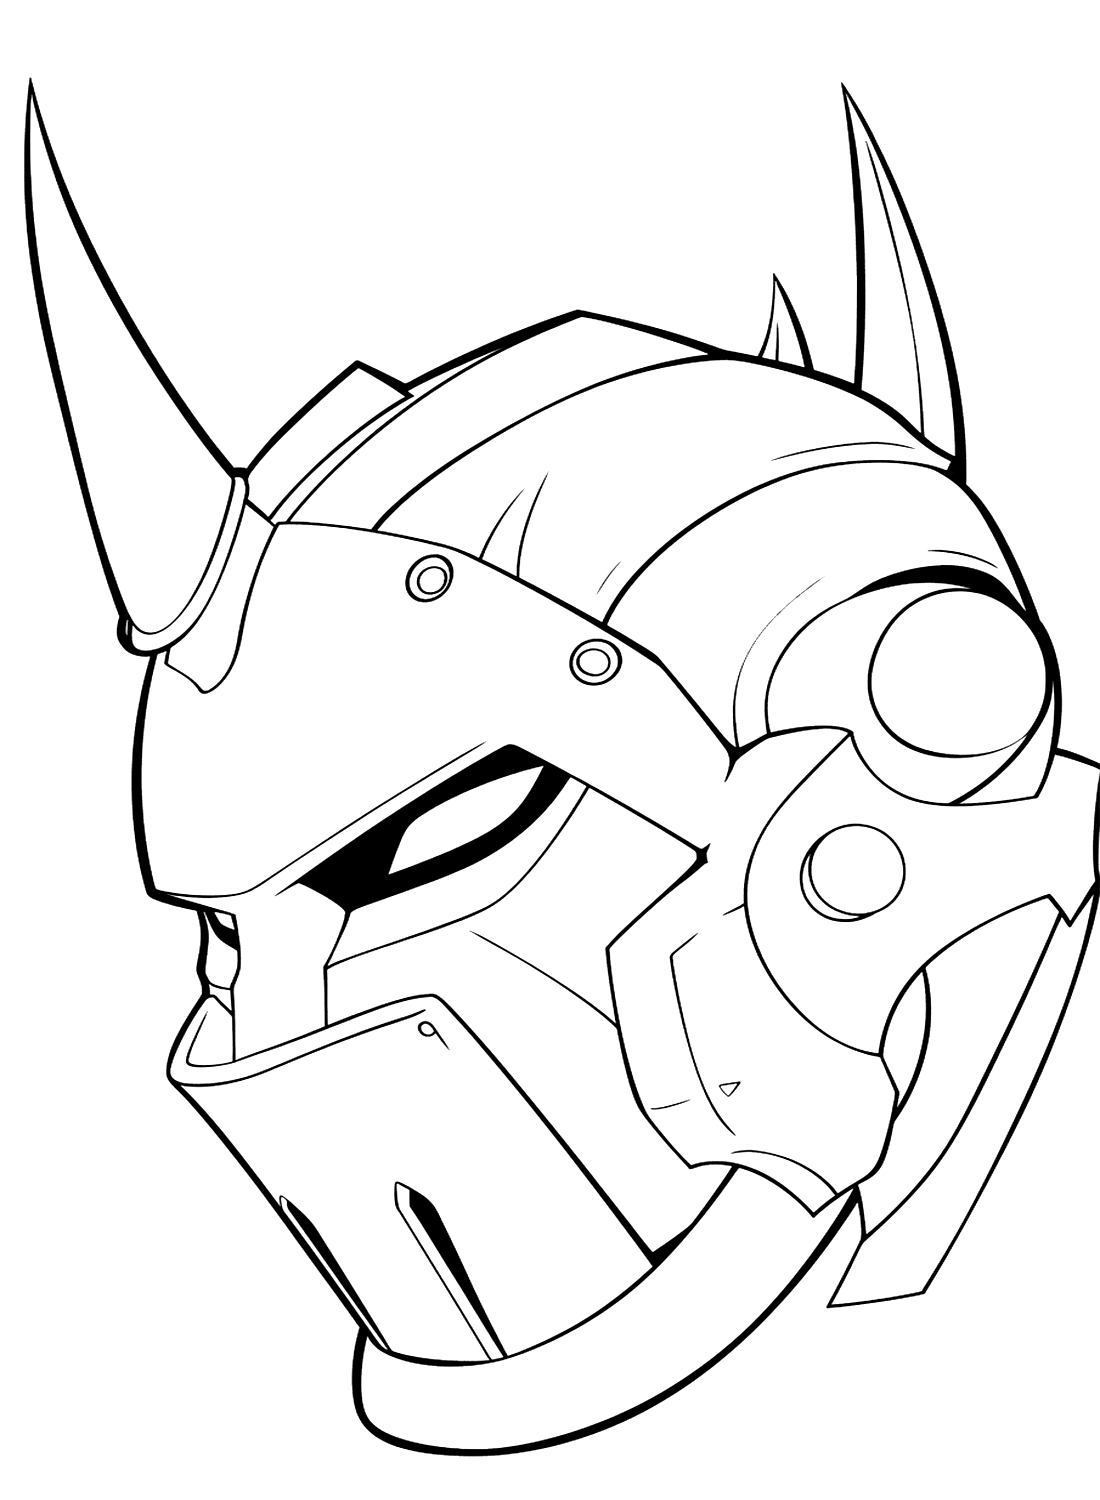 Coloring Page Alphonse Elric from Alphonse Elric